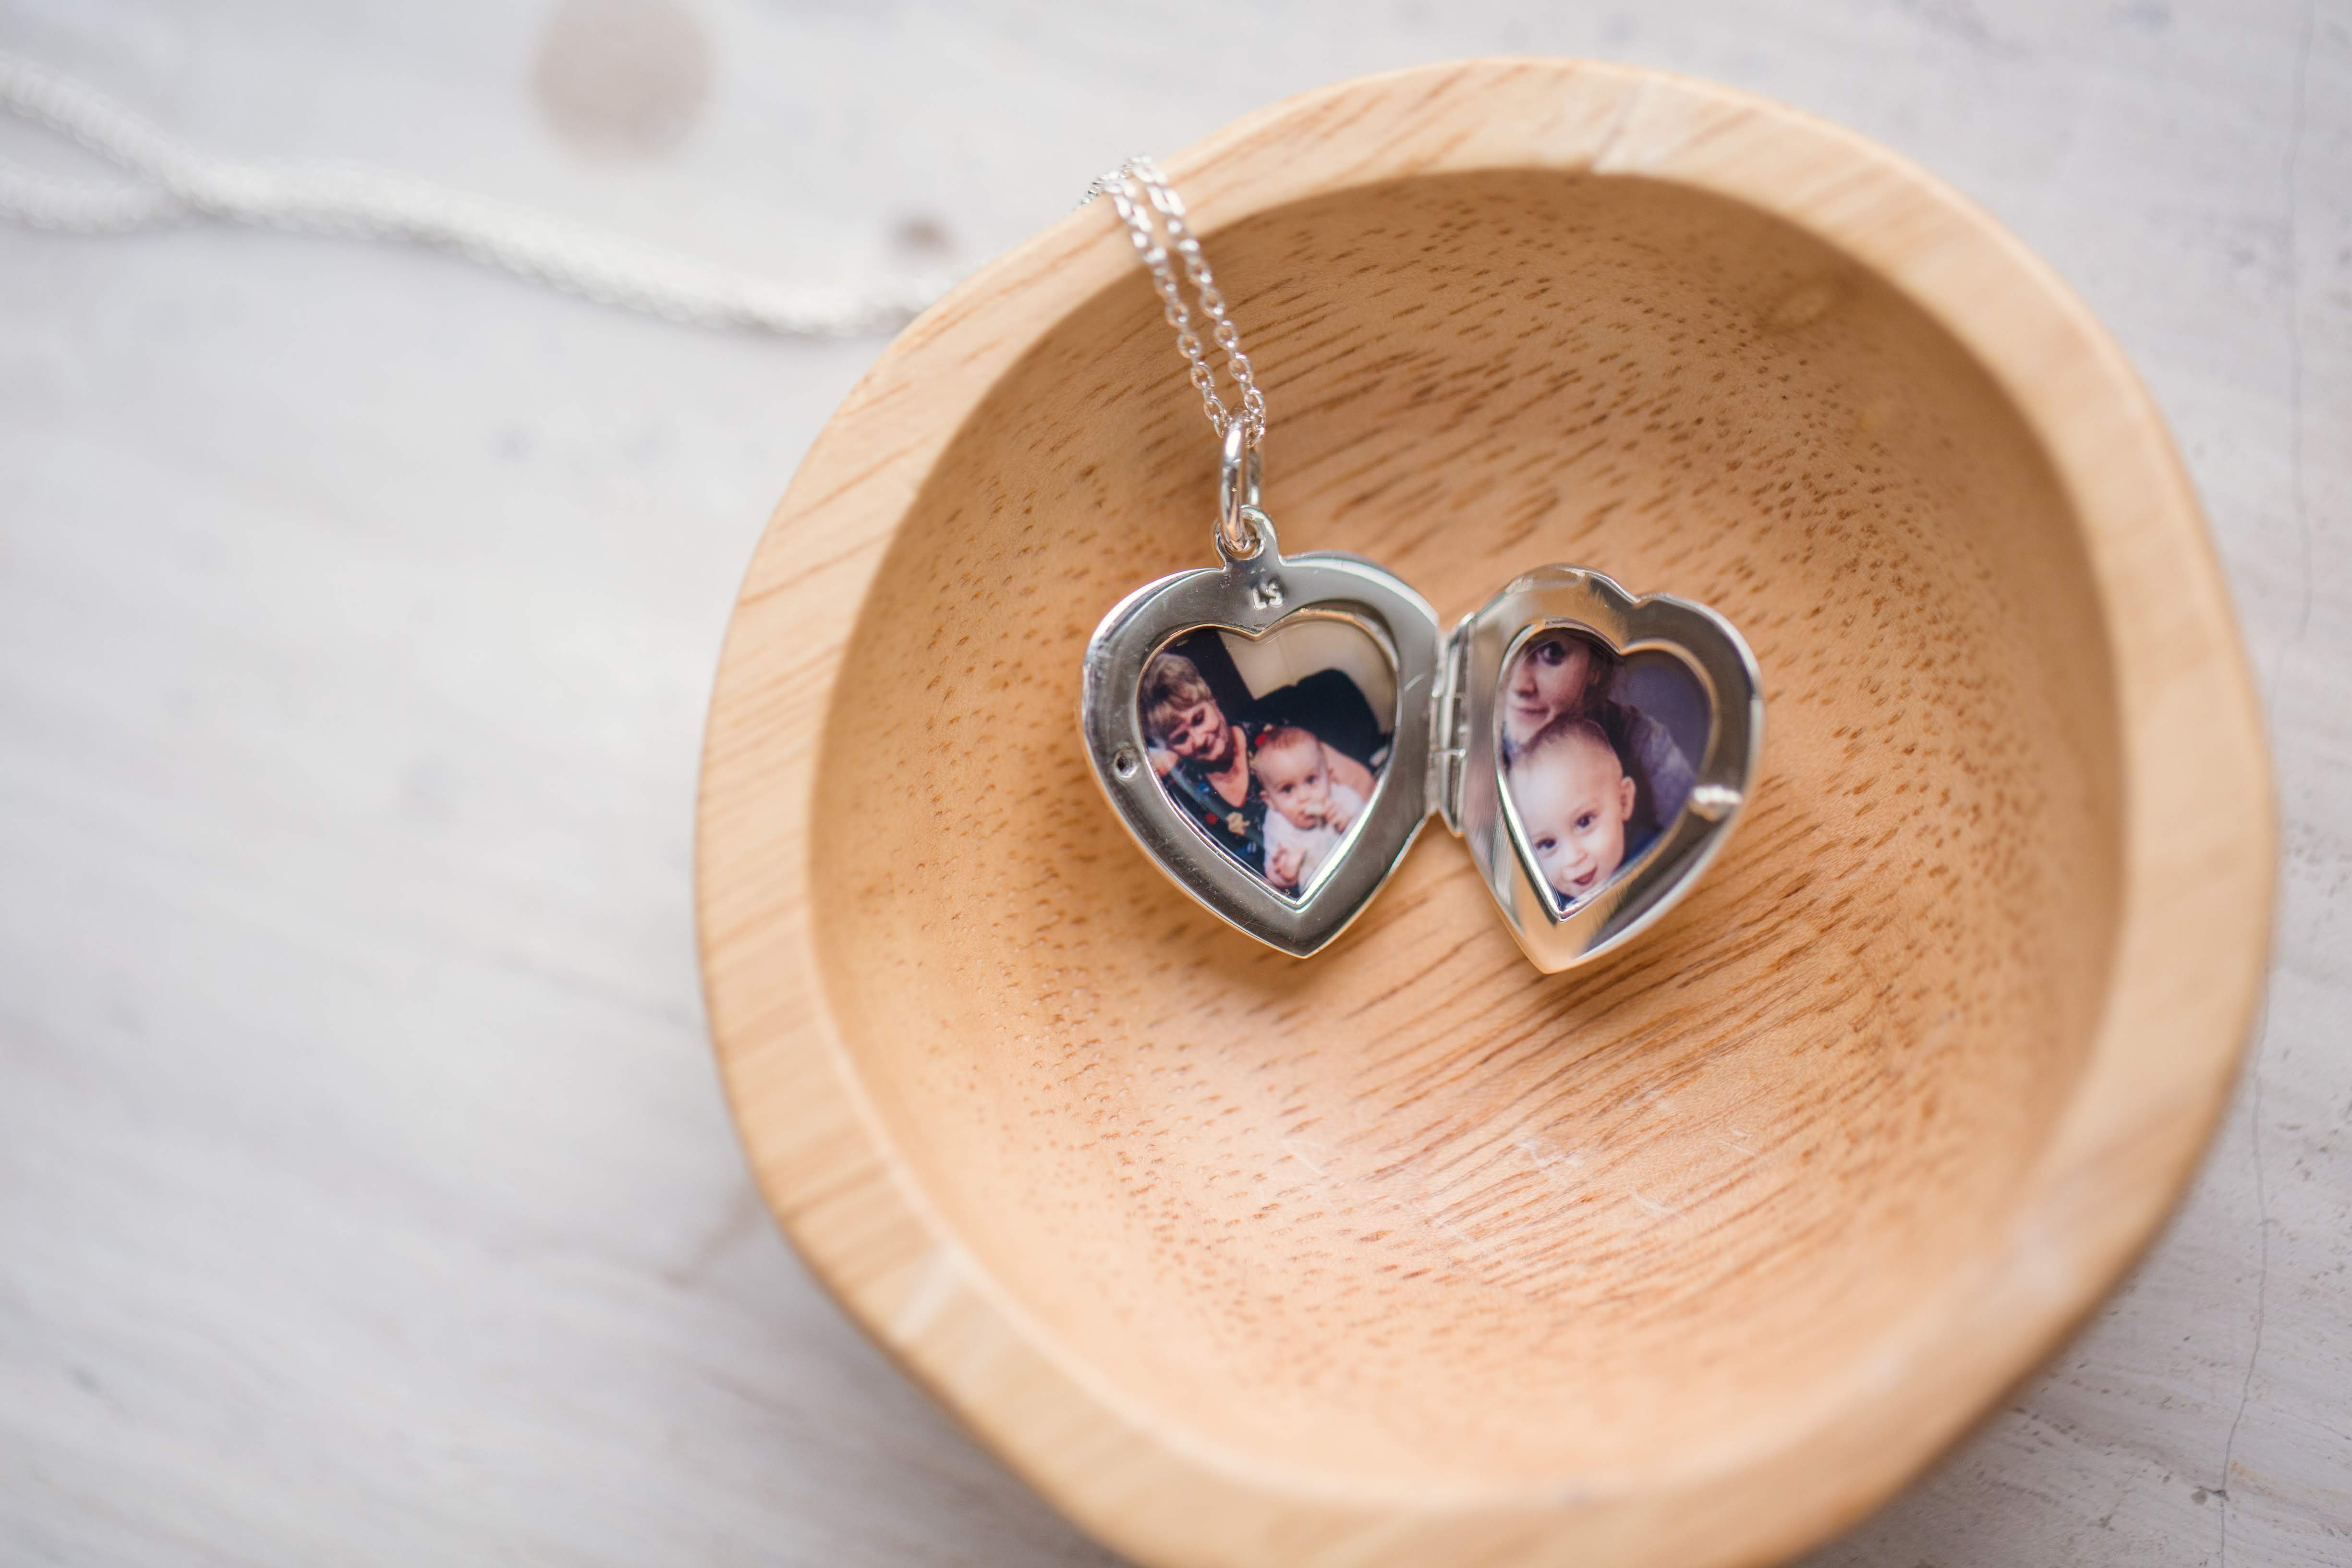 The Silver Roxie Belle Heart Locket with Two Photos Inside